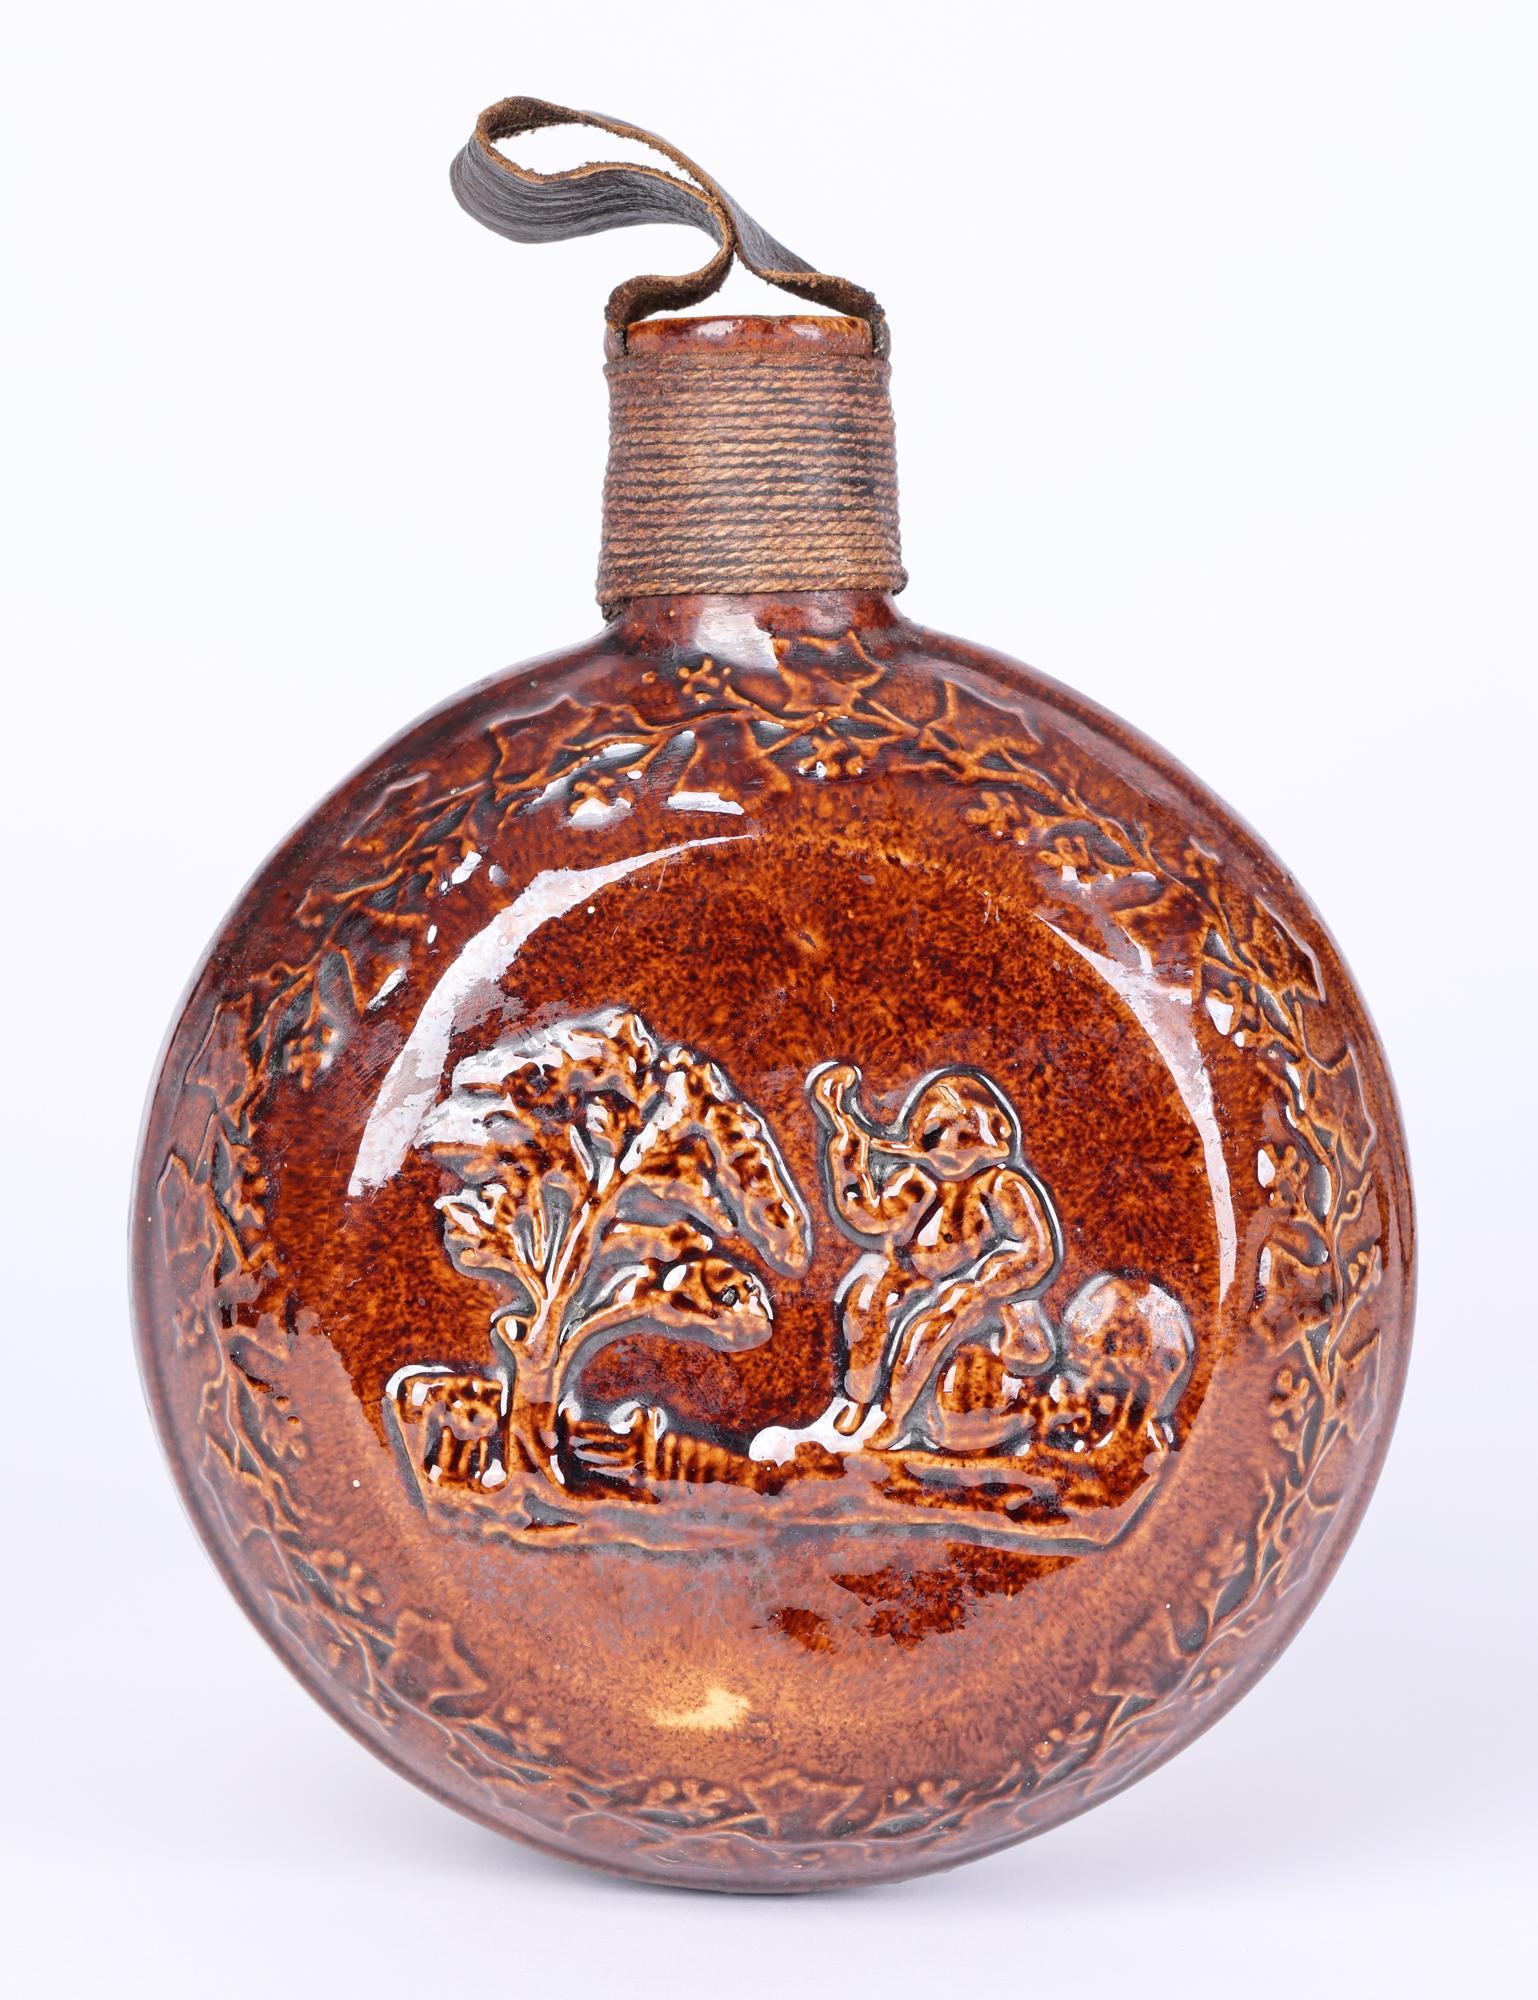 Rockingham Rare Treacle Glazed Smoking Scene Pottery Flask In Good Condition For Sale In Bishop's Stortford, Hertfordshire